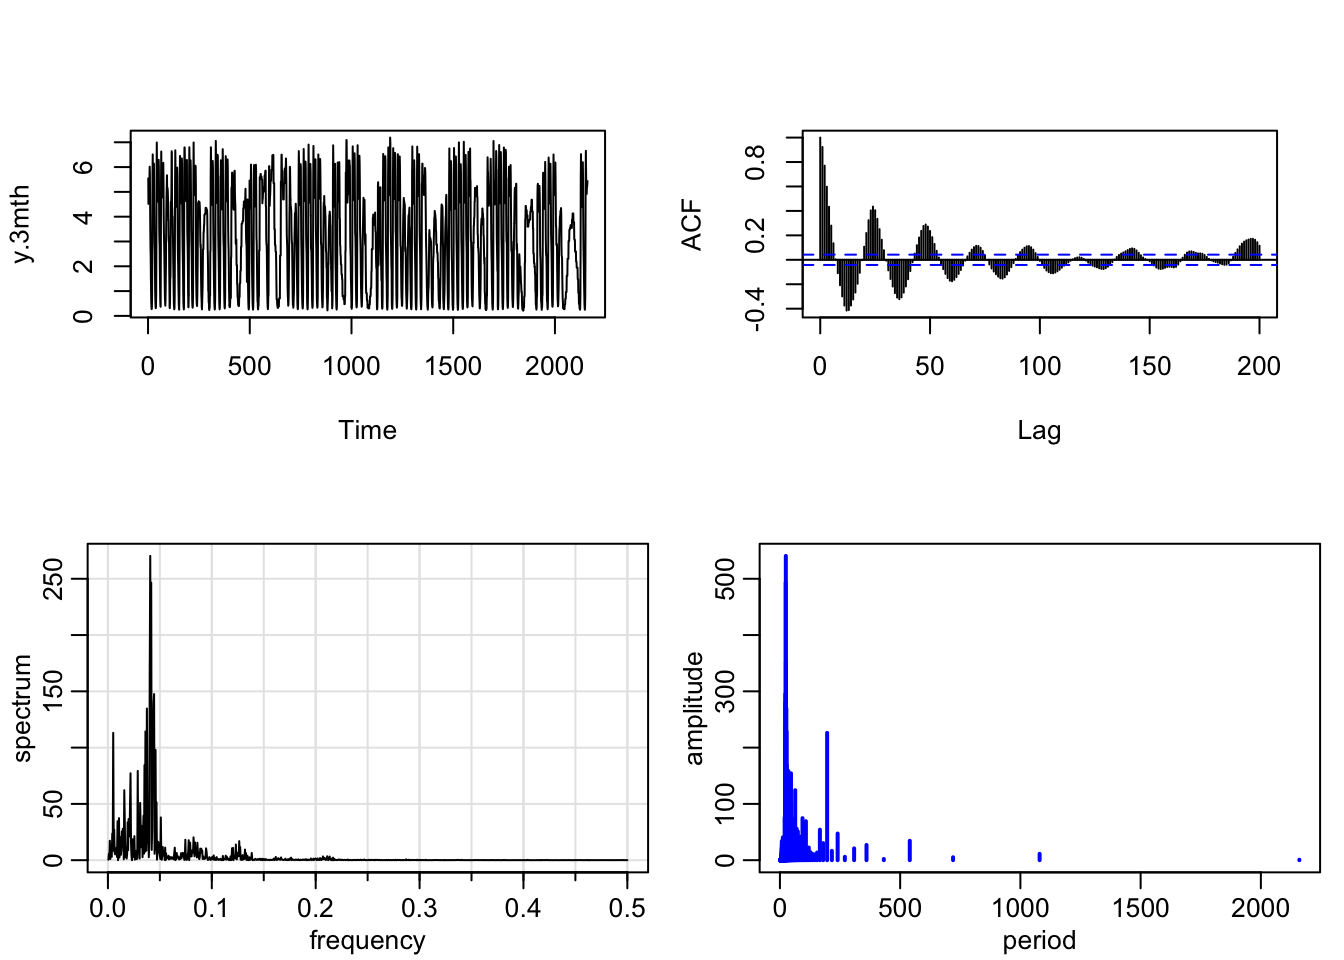 Time series plot (left) and ACF (right) of hourly traffic volume in the top panel and sample spectrum (left) and amplitude versus period (right) in the bottom panel.